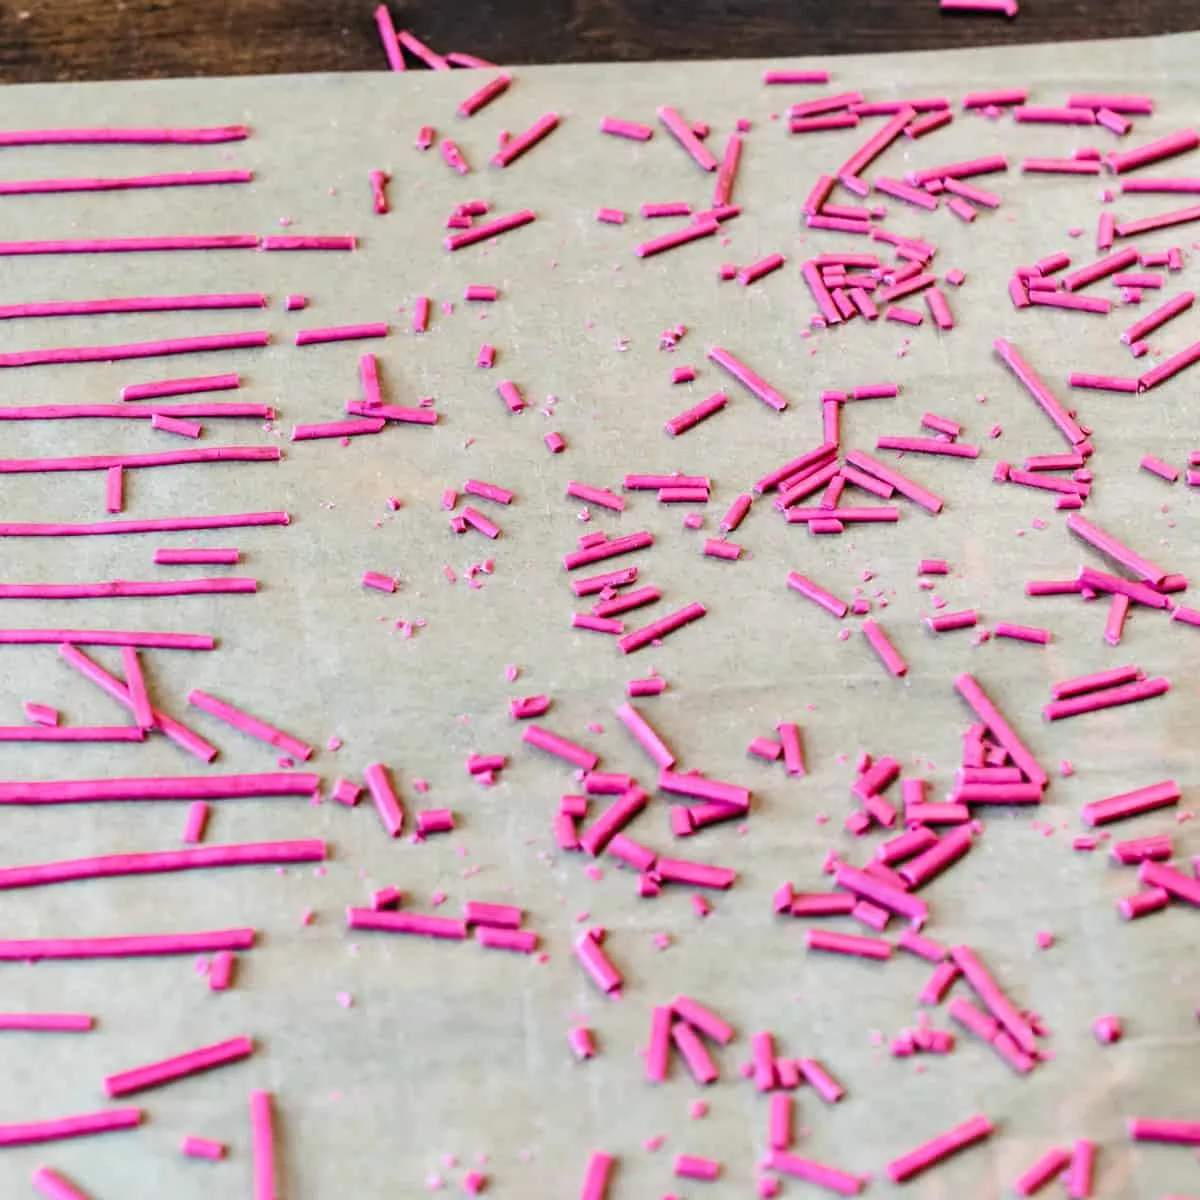 Piped lines of dried out pink sprinkle mixture being cut into small lines.